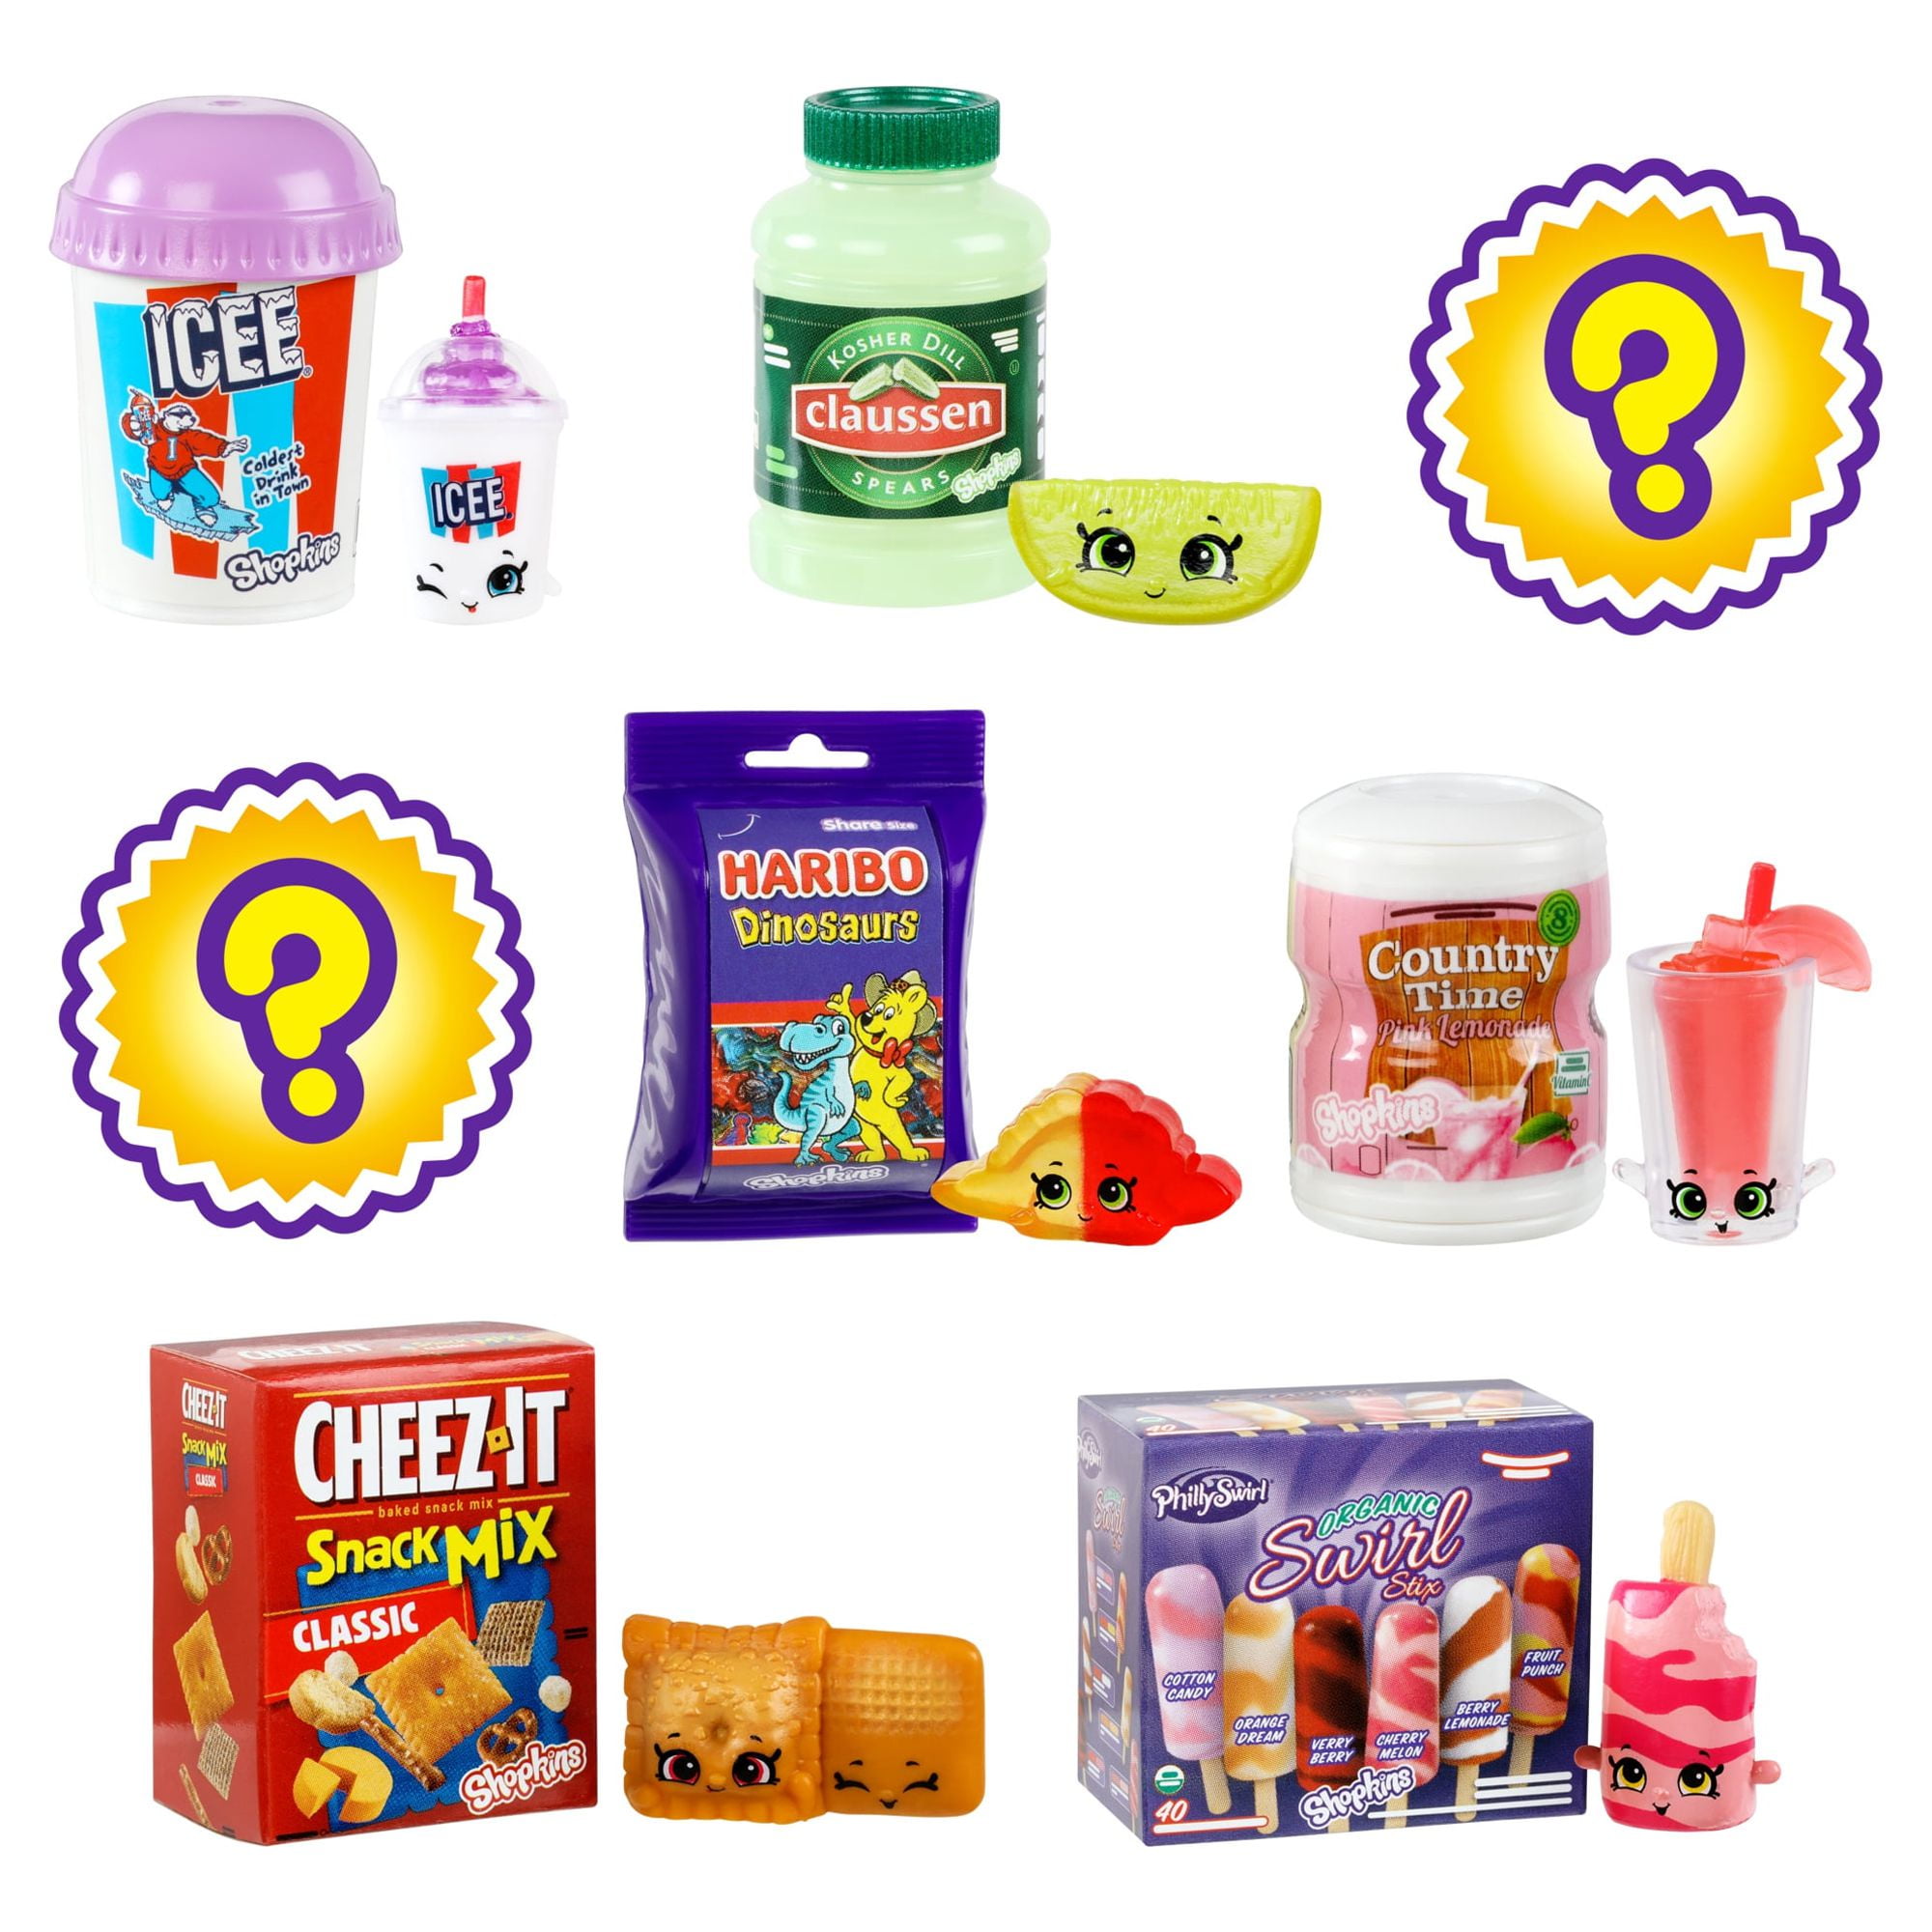 Real littles • Compare (18 products) see price now »